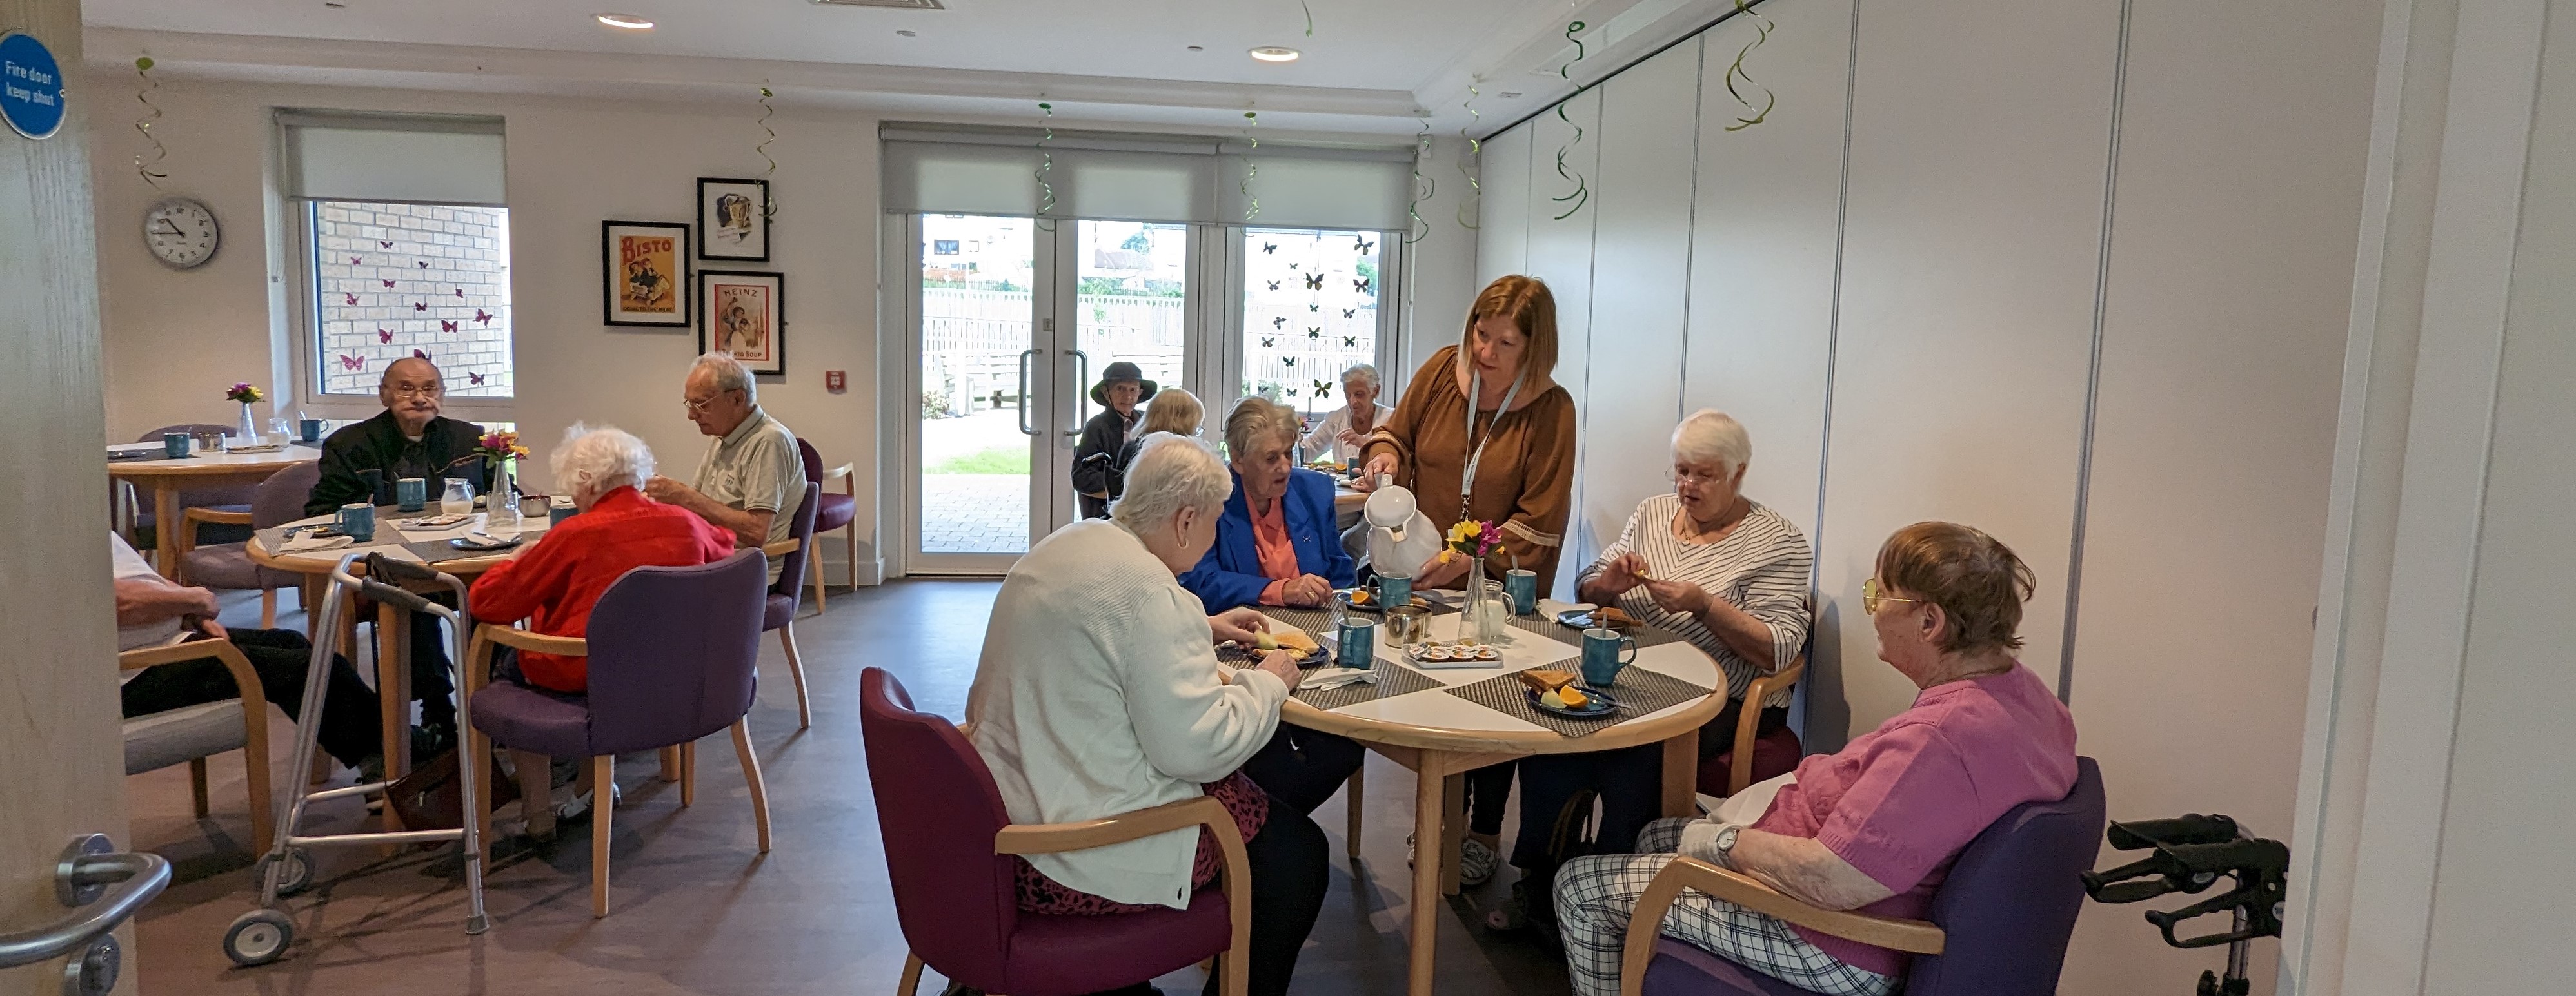 image of services users in the dining room of a day care centre